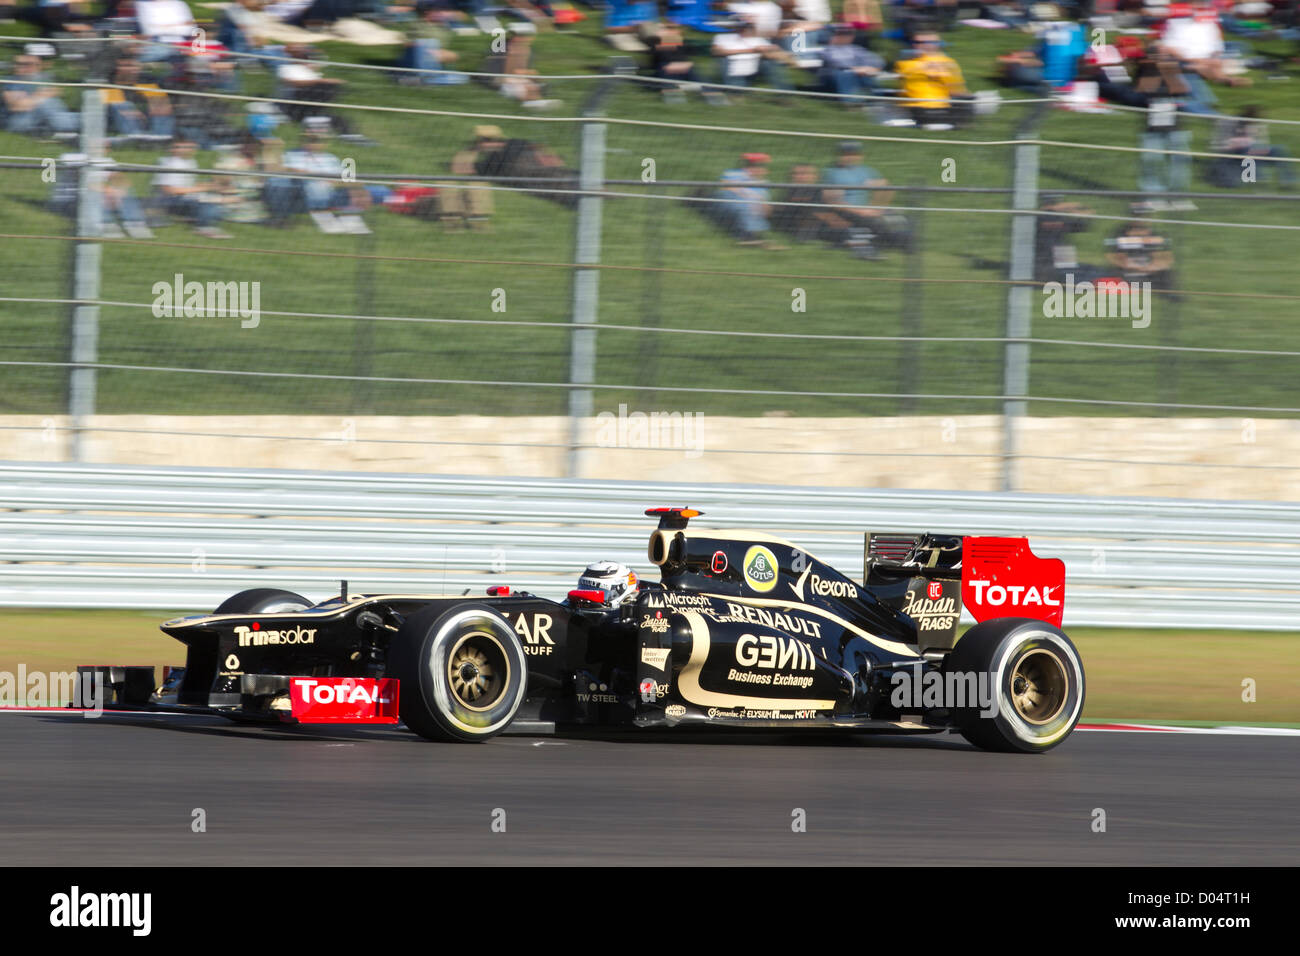 Driver Kimi Raikkonen handles his Lotus F1 car during practice for the United States Grand Prix at Circuit of the Americas Stock Photo